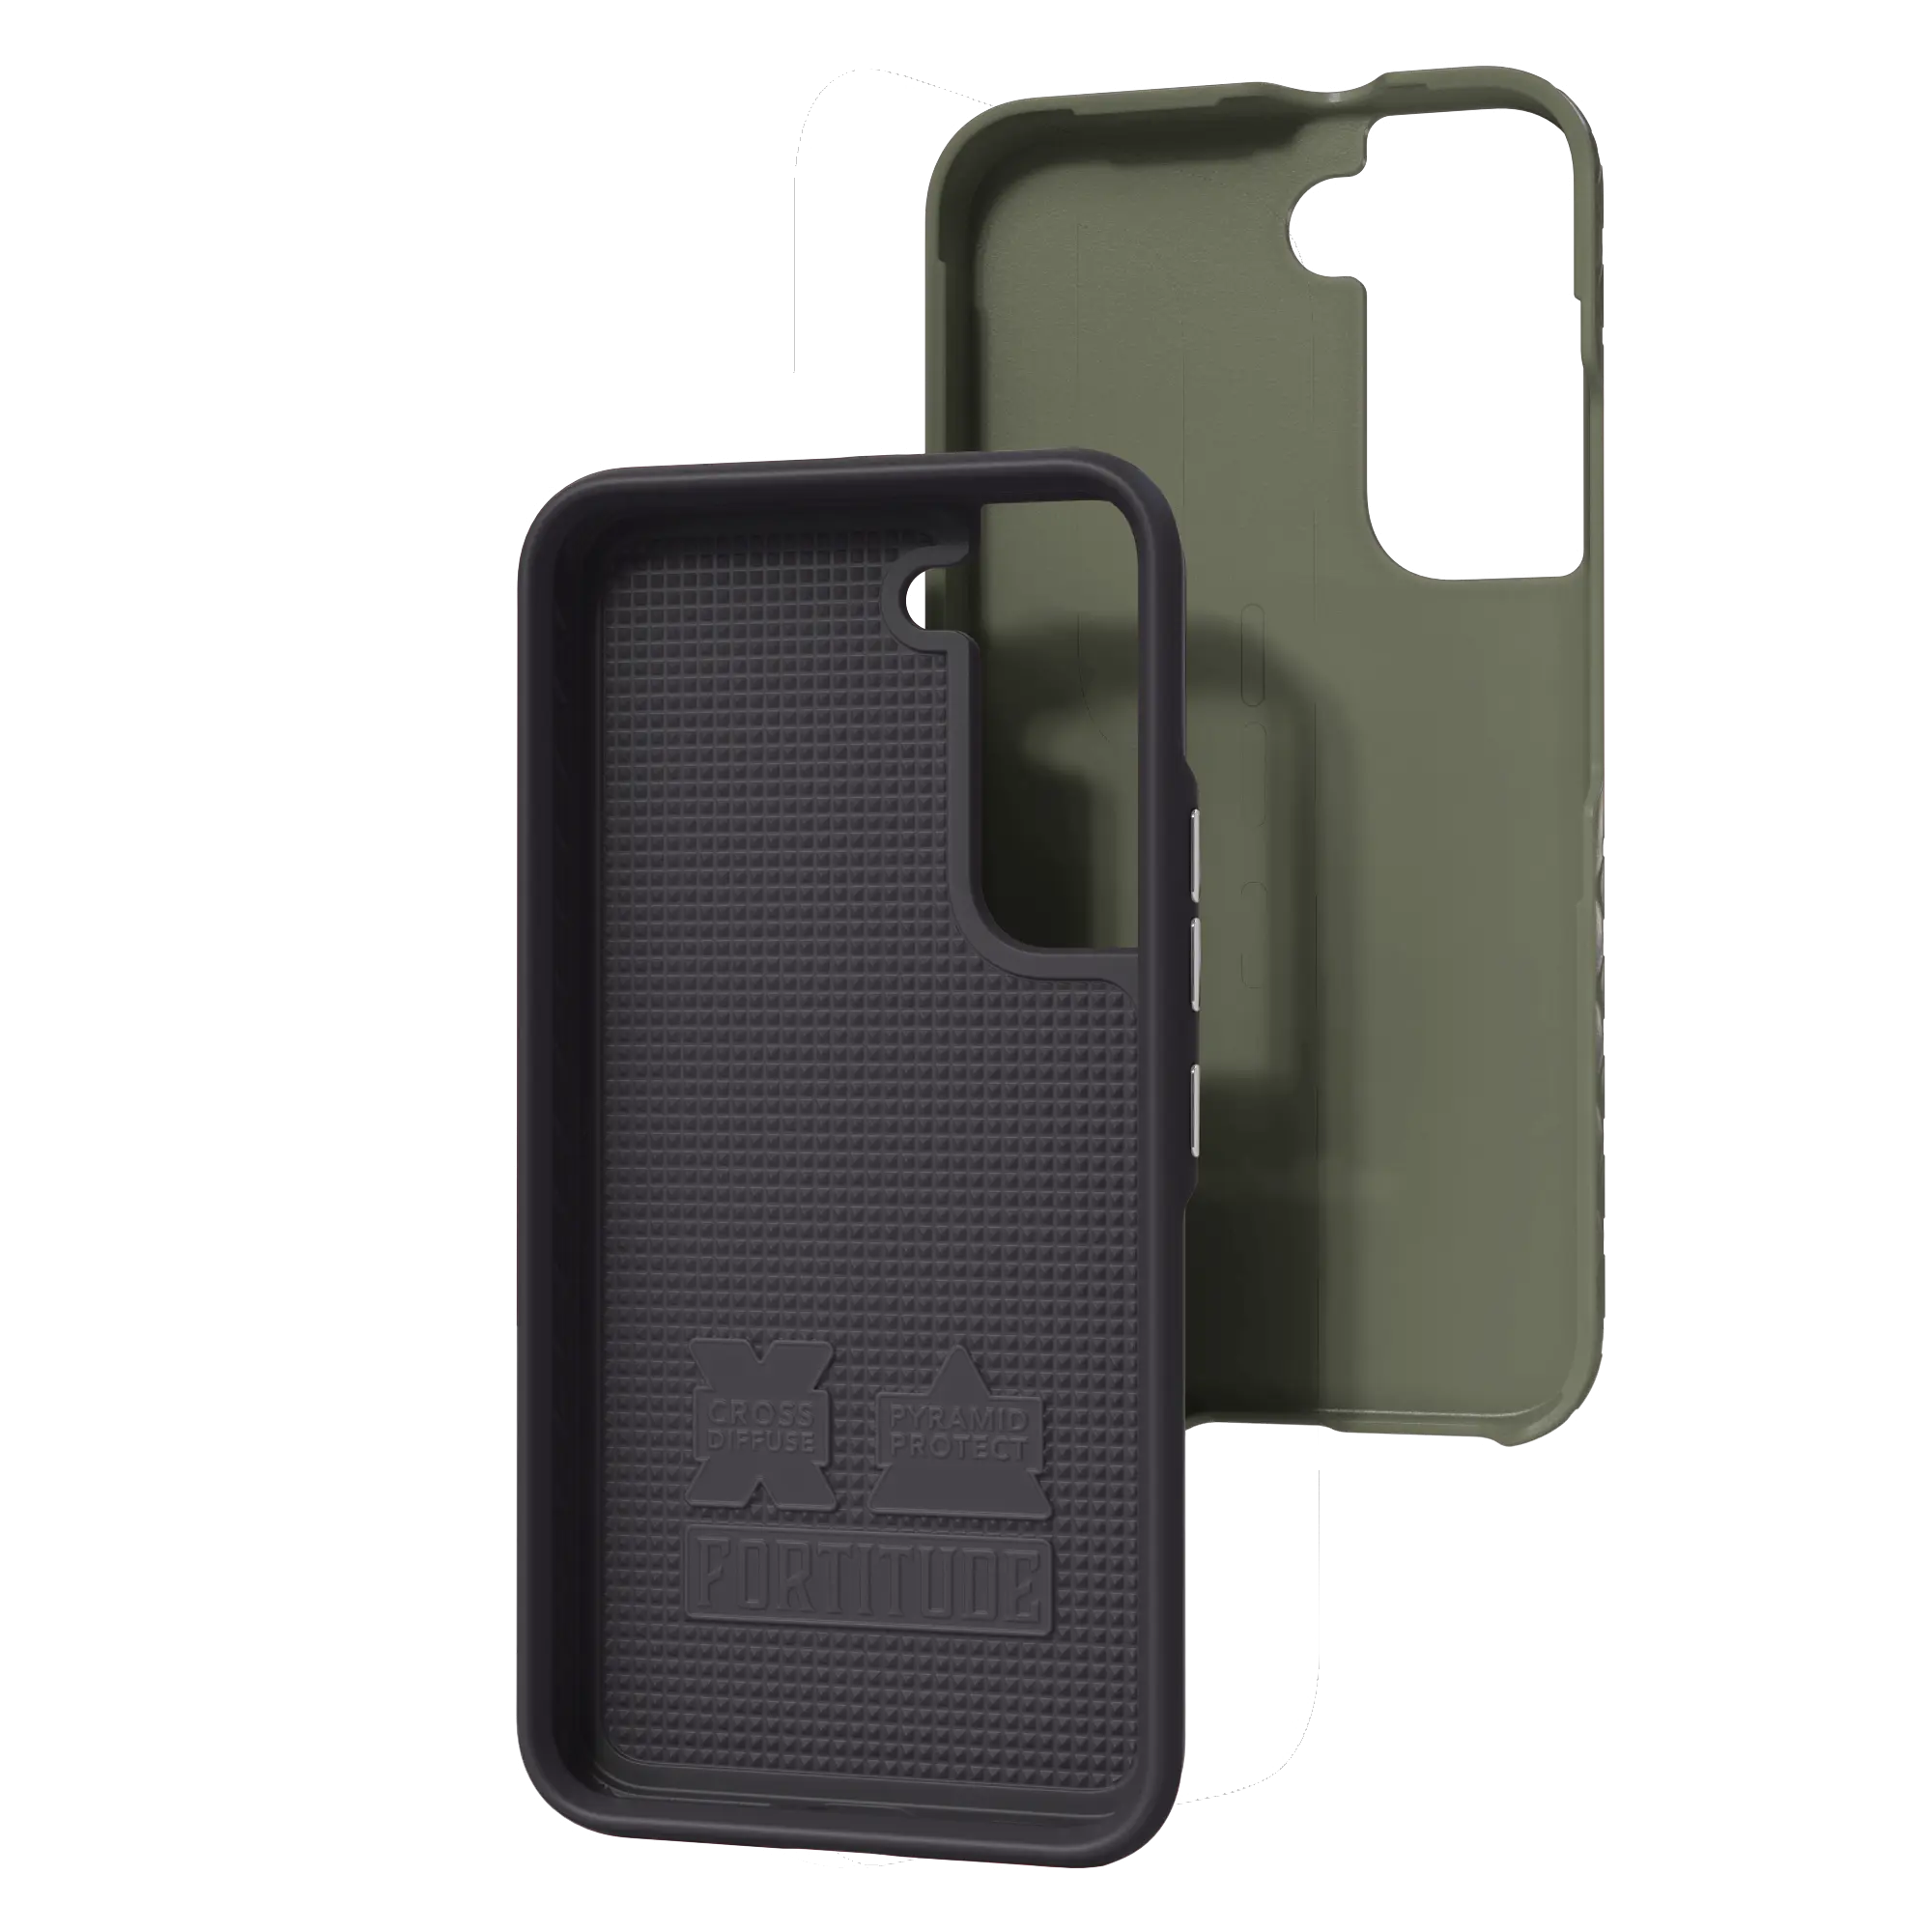 Fortitude Series for Samsung Galaxy S22 5G - Olive Drab Green - Case -  - cellhelmet